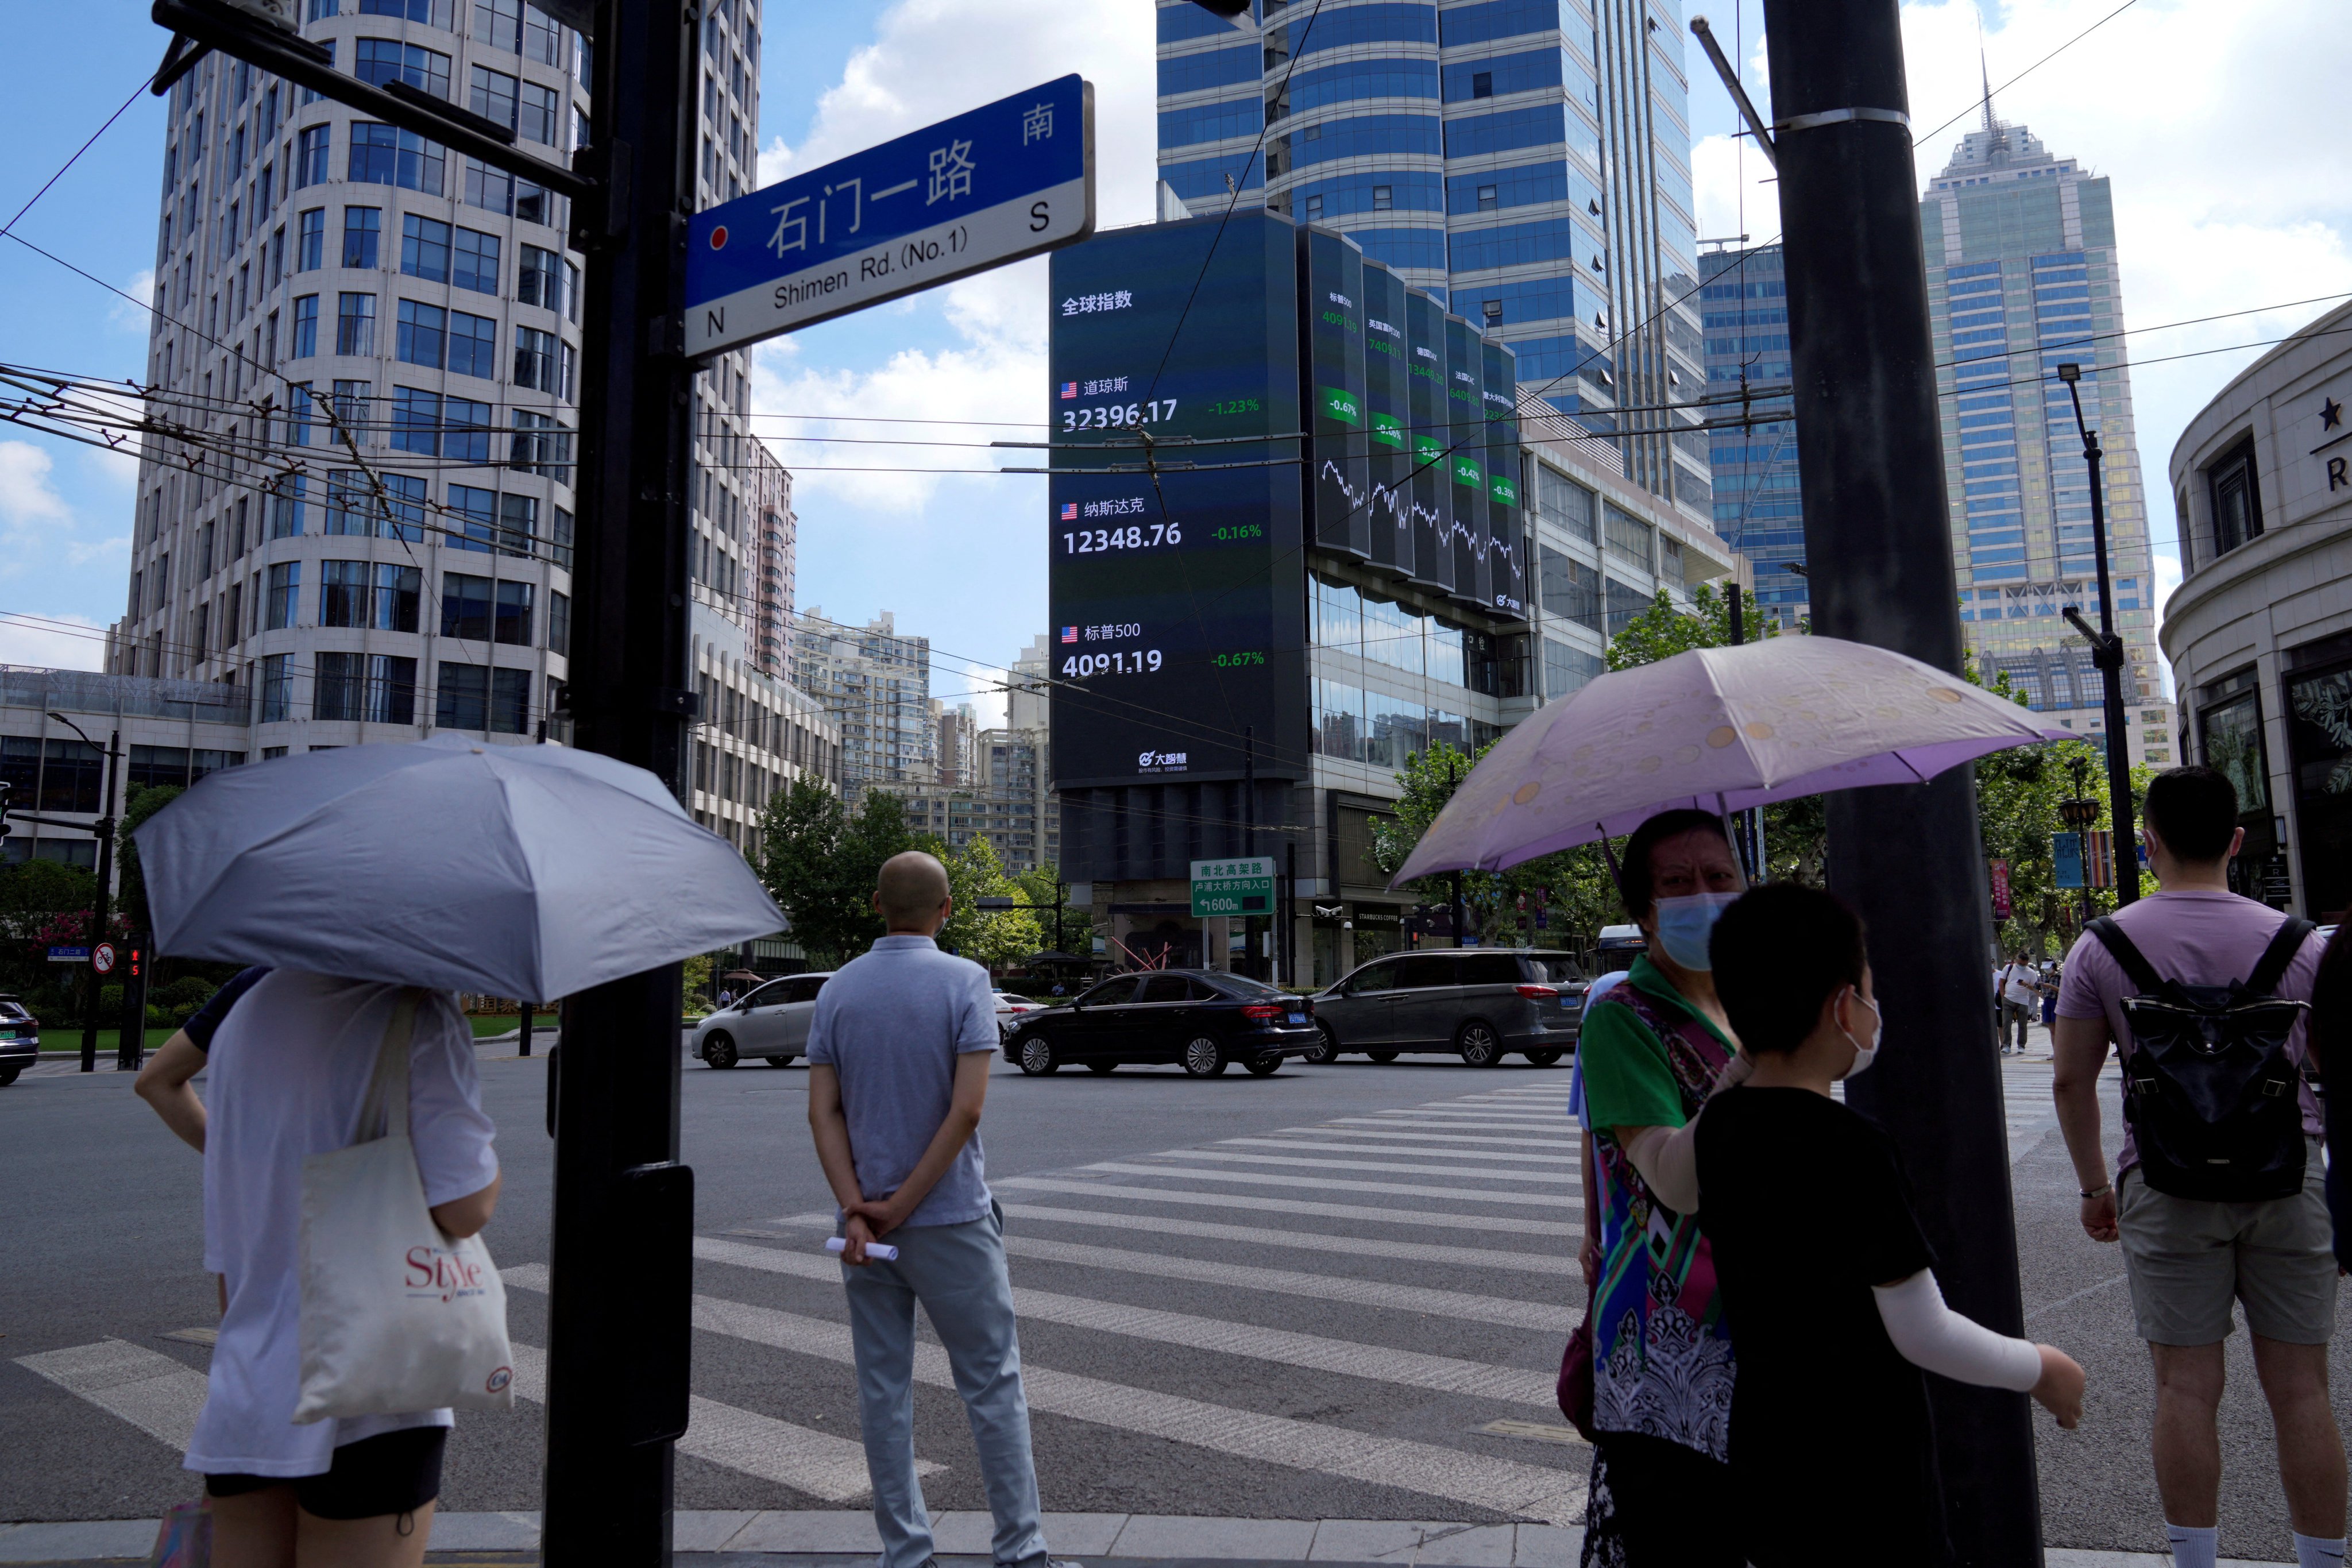 Pedestrians wait to cross a road at a junction in Shanghai in August 2022. Photo: Reuters